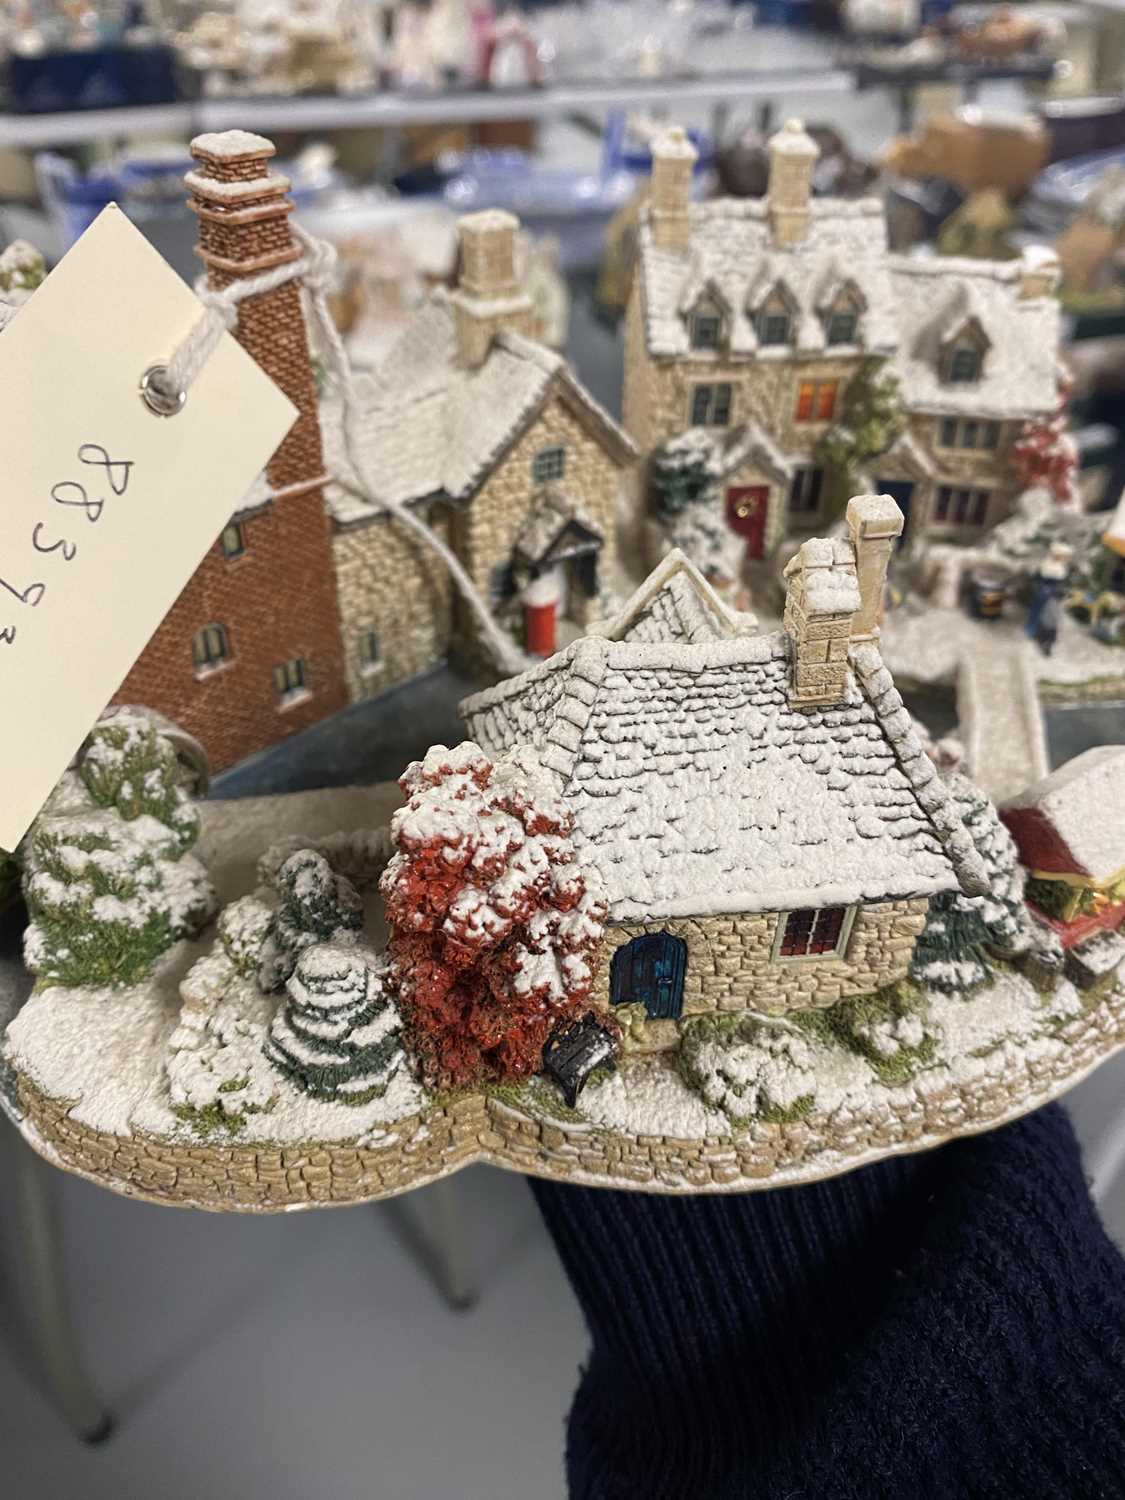 A Lilliput Lane limited edition model - Image 3 of 5